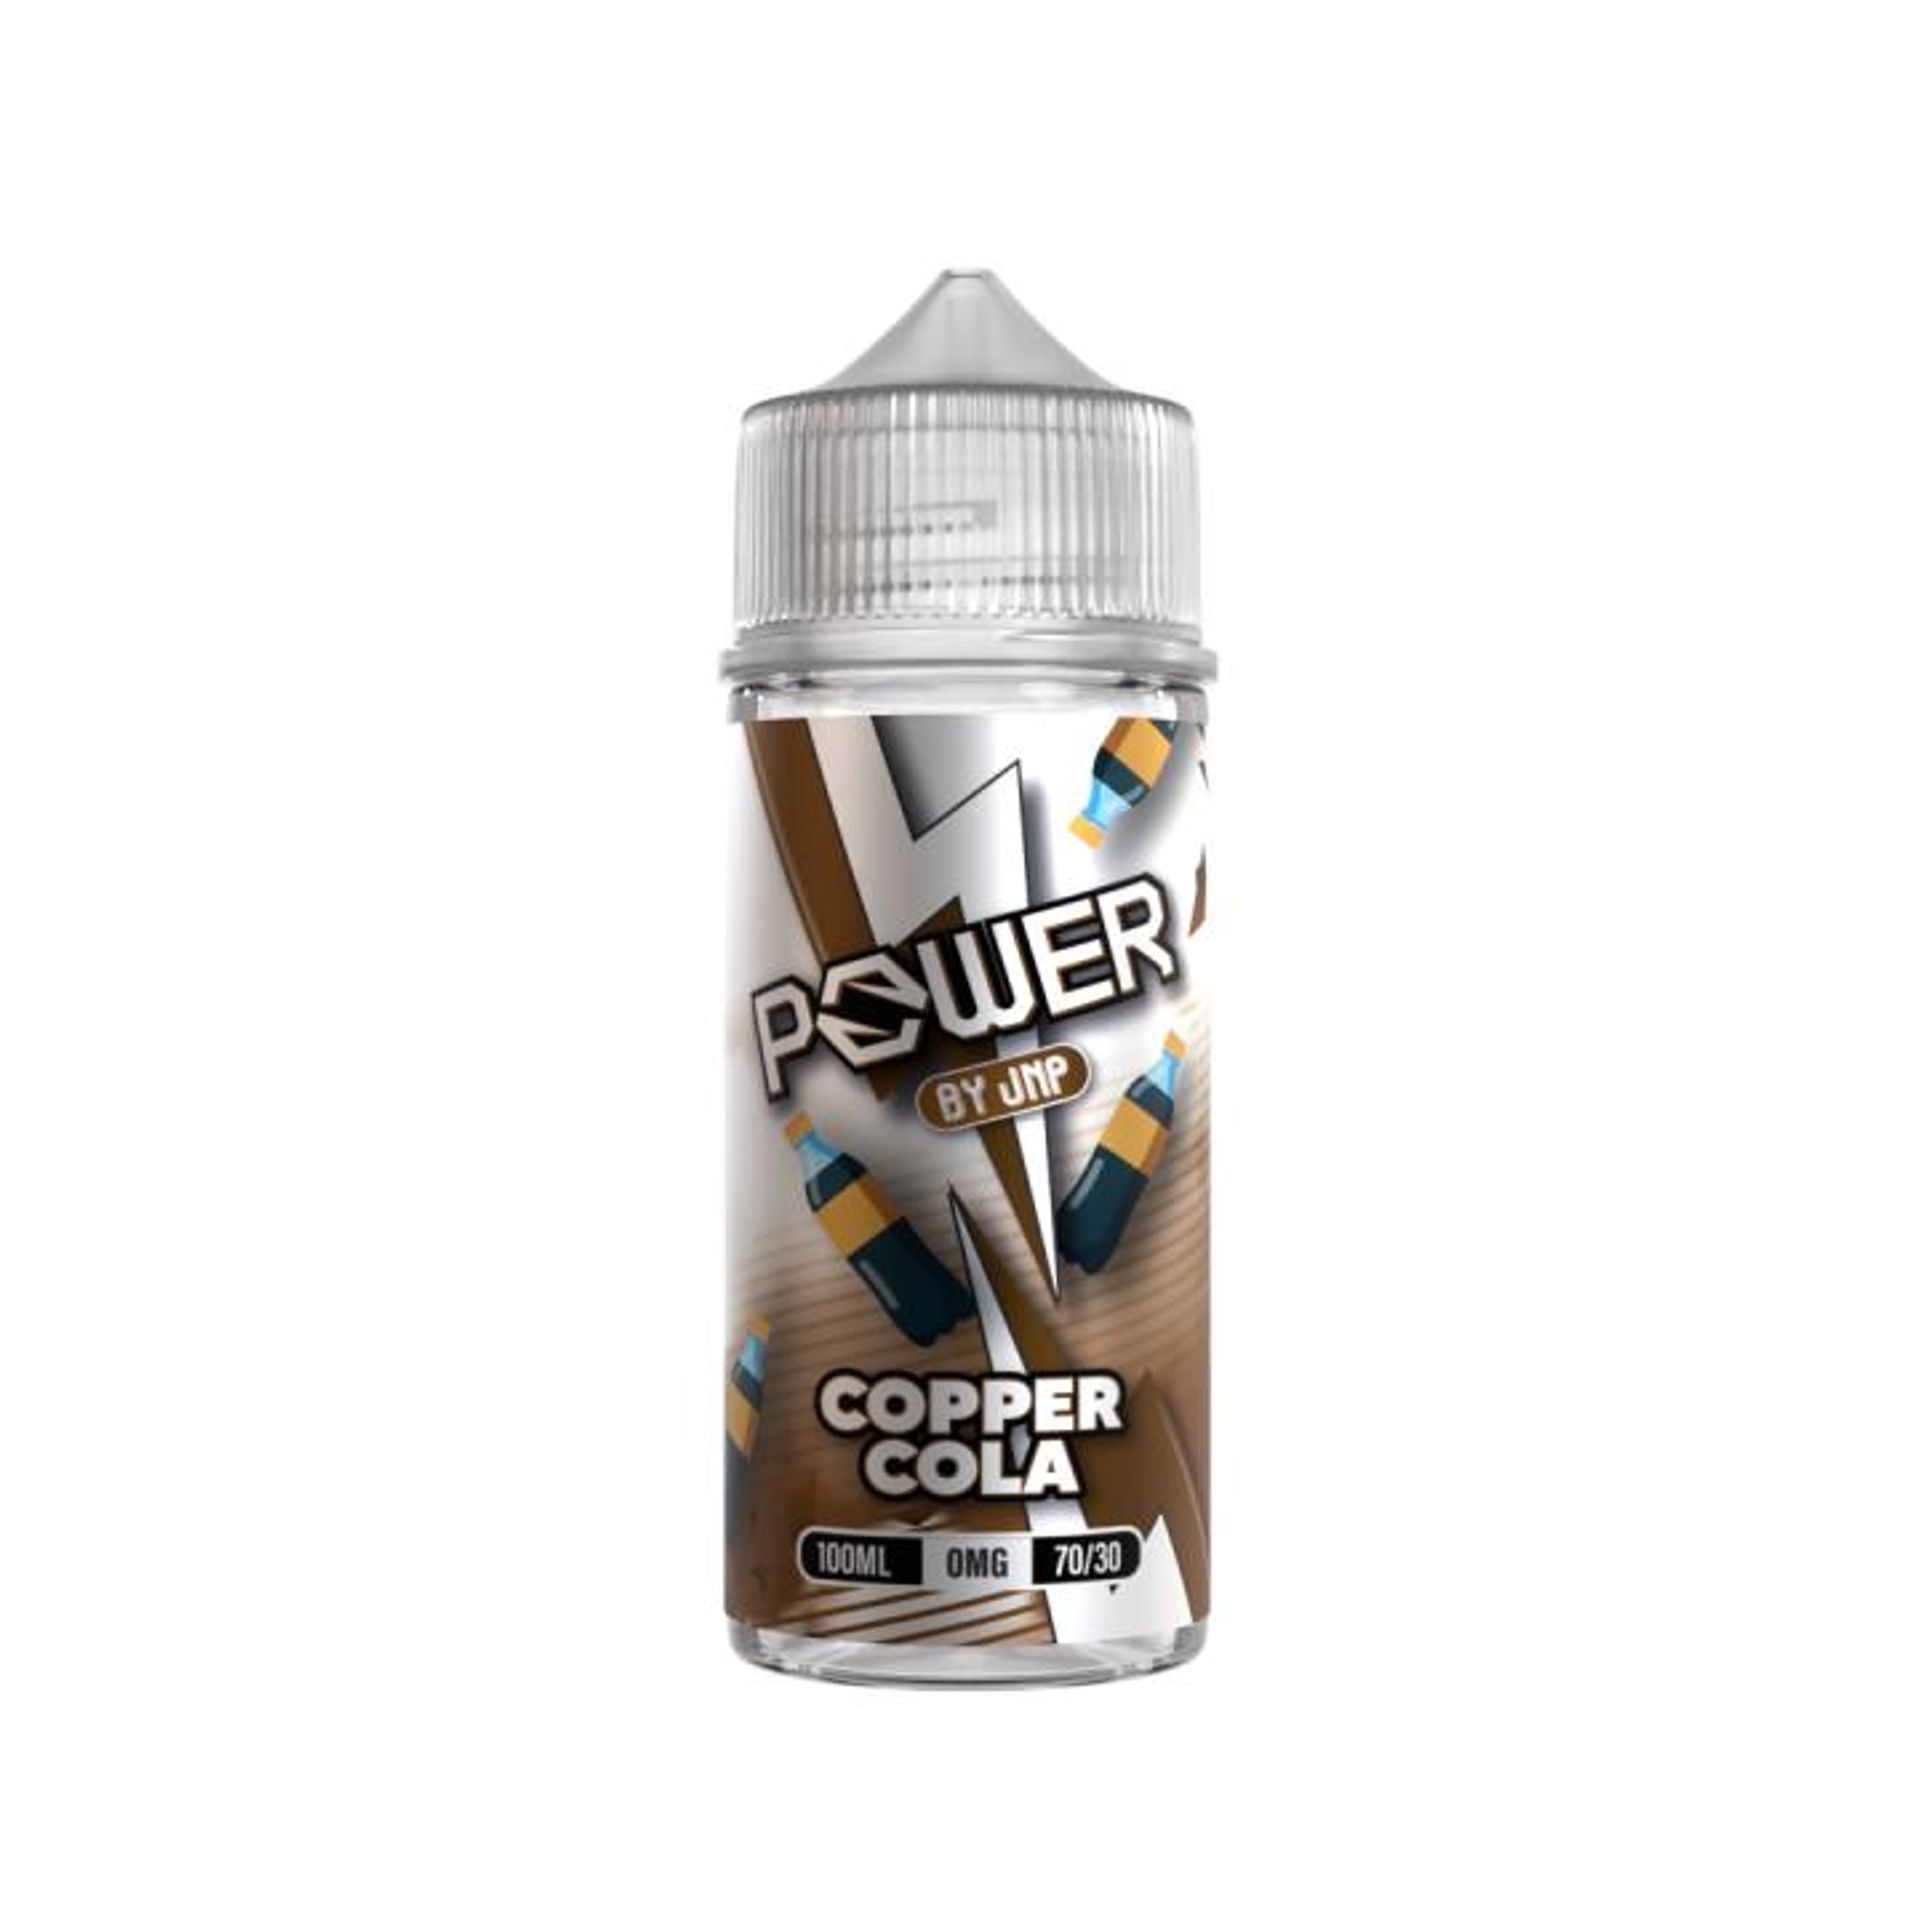 Image of Copper Cola by Power Bar